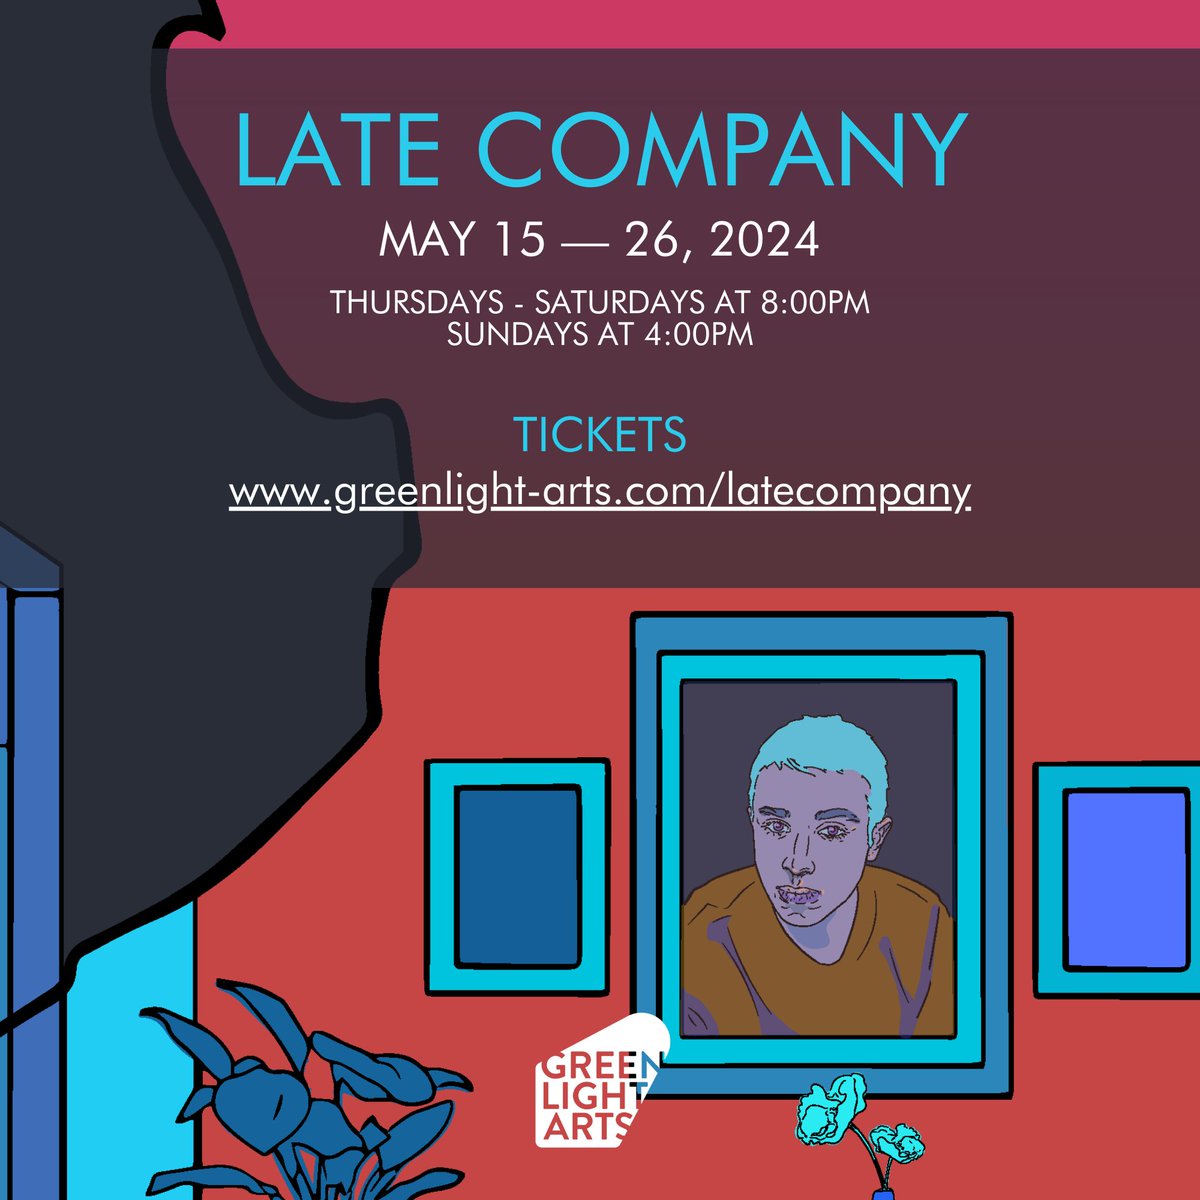 Next week, we welcome our first audience to the CCPA for Late Company! Book your tickets NOW at greenlight-arts.com/latecompany! 💙

#LateCompany #GLATheatreCompany #kwawesome #wrawesome #dtkitchener #theatrewr #explorewr #kwfamous